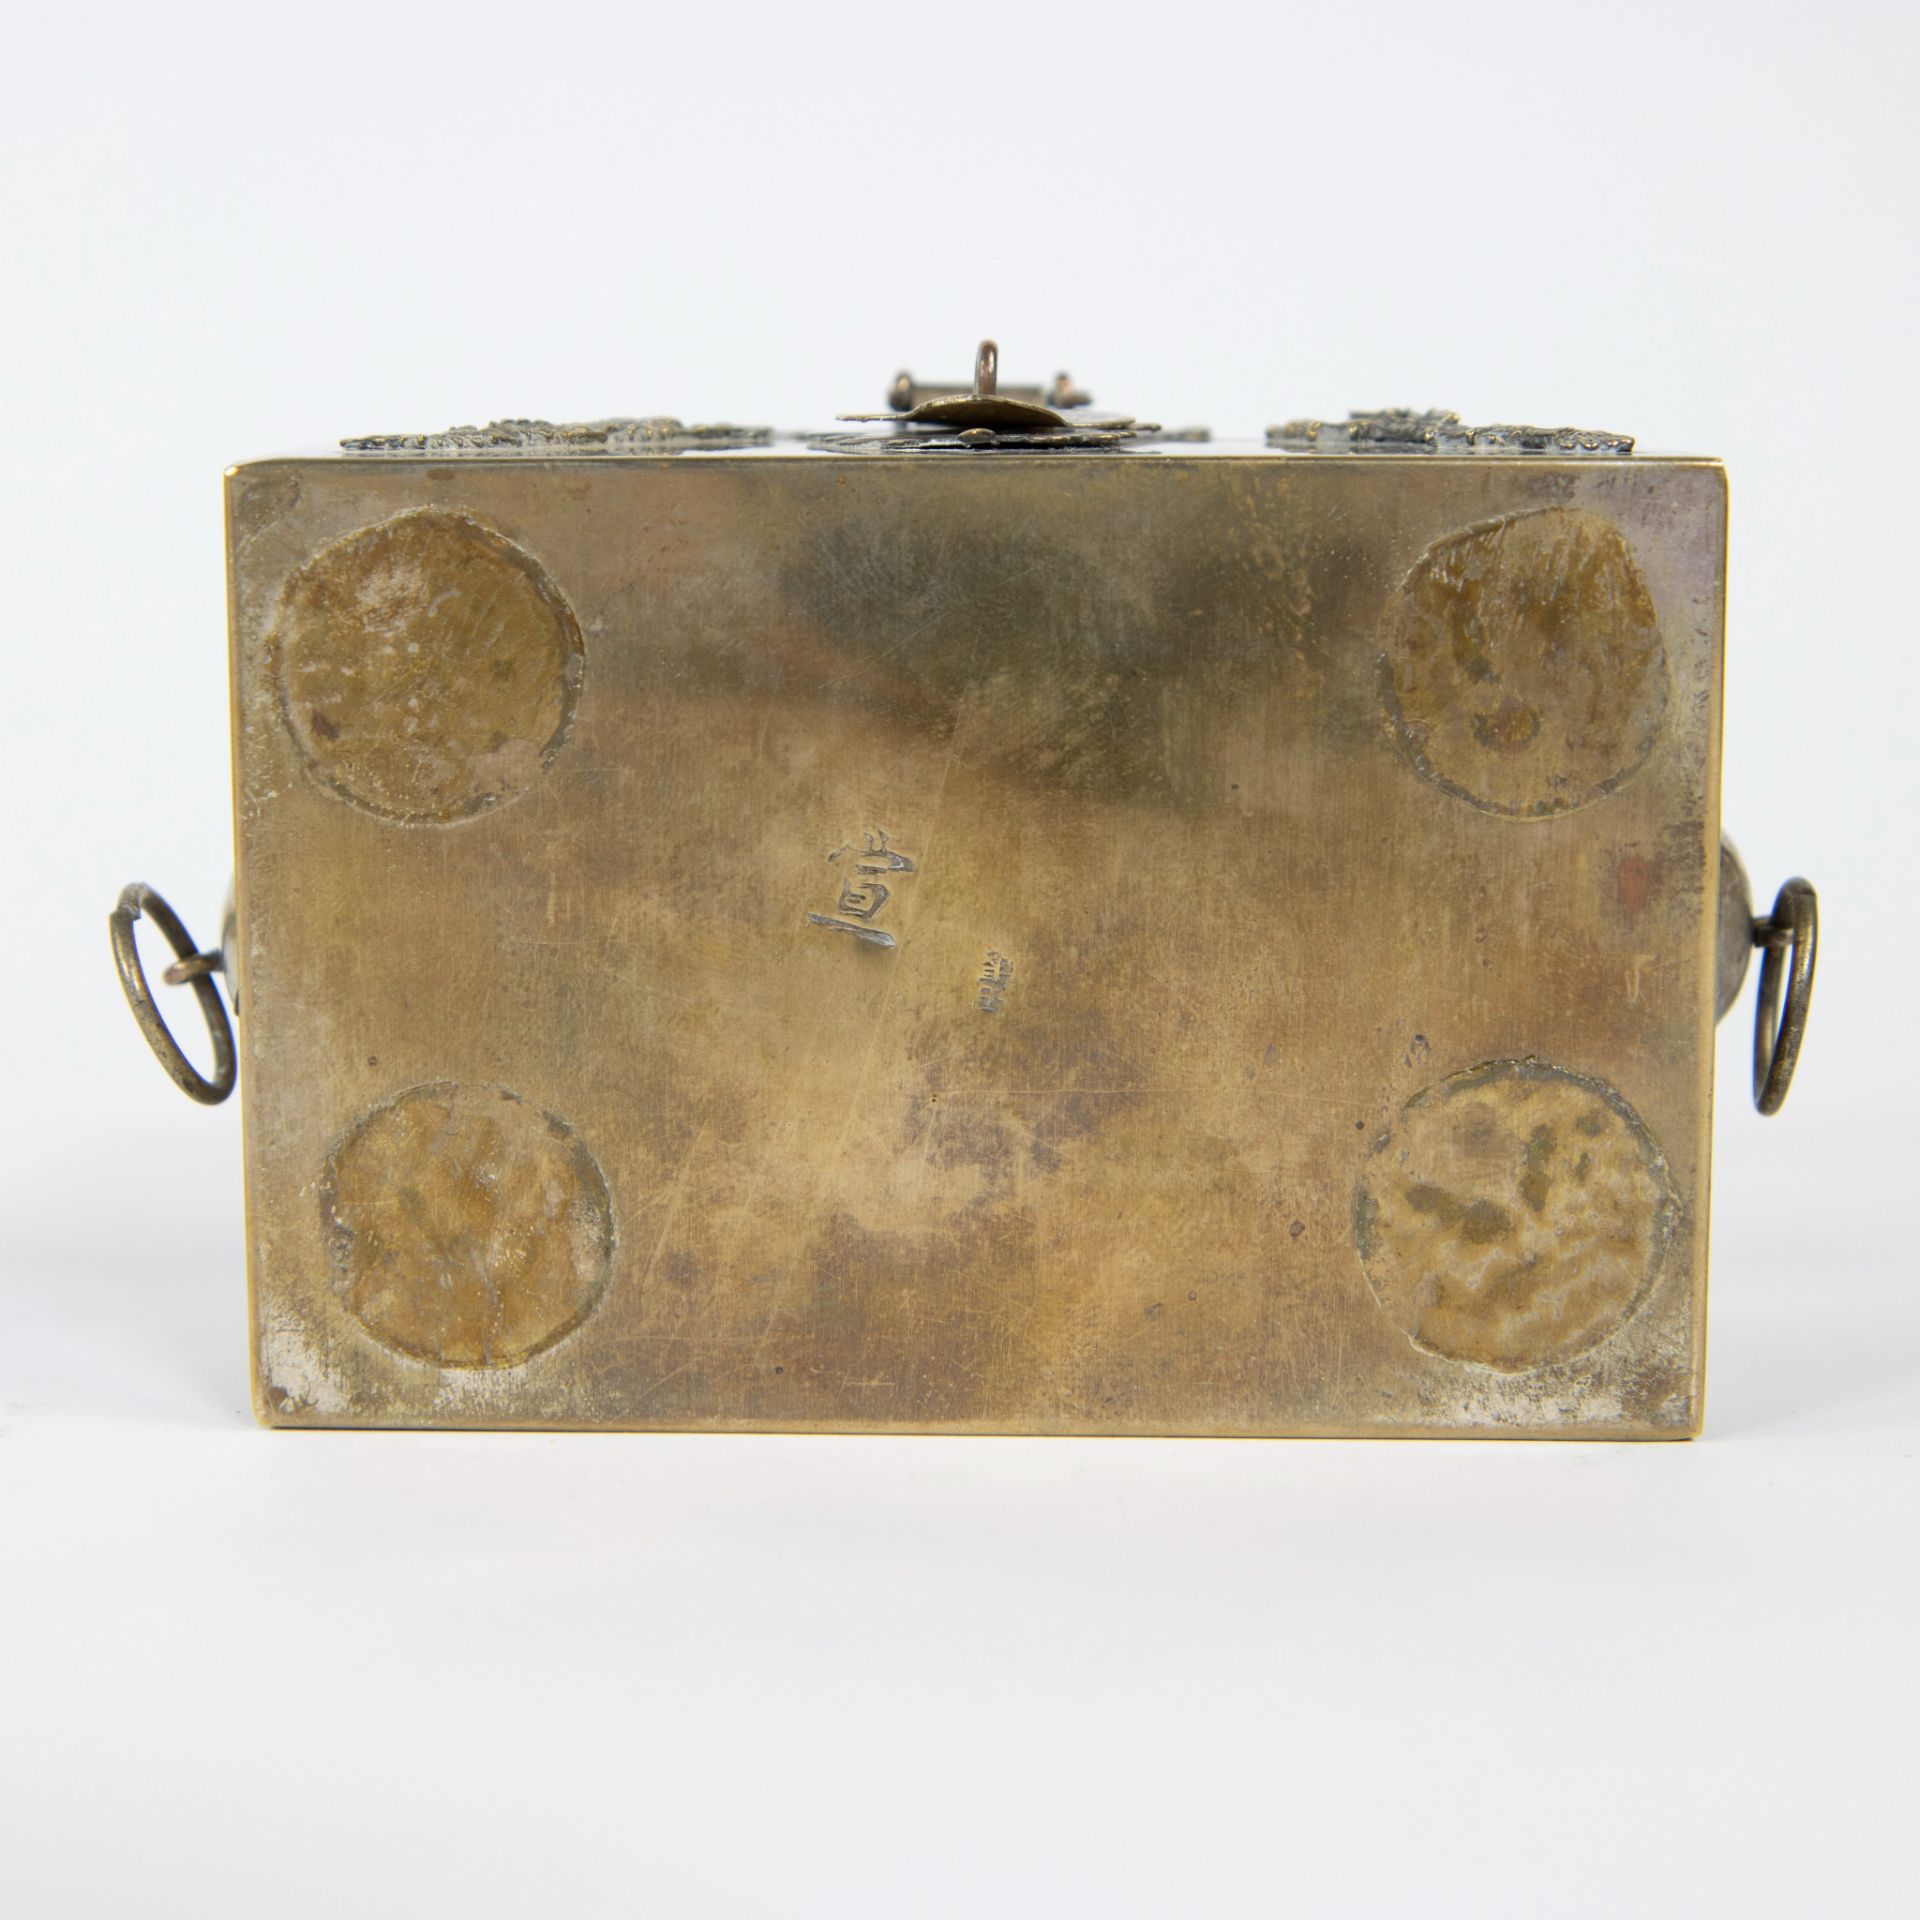 Chinese silver jewelry box - Image 6 of 6